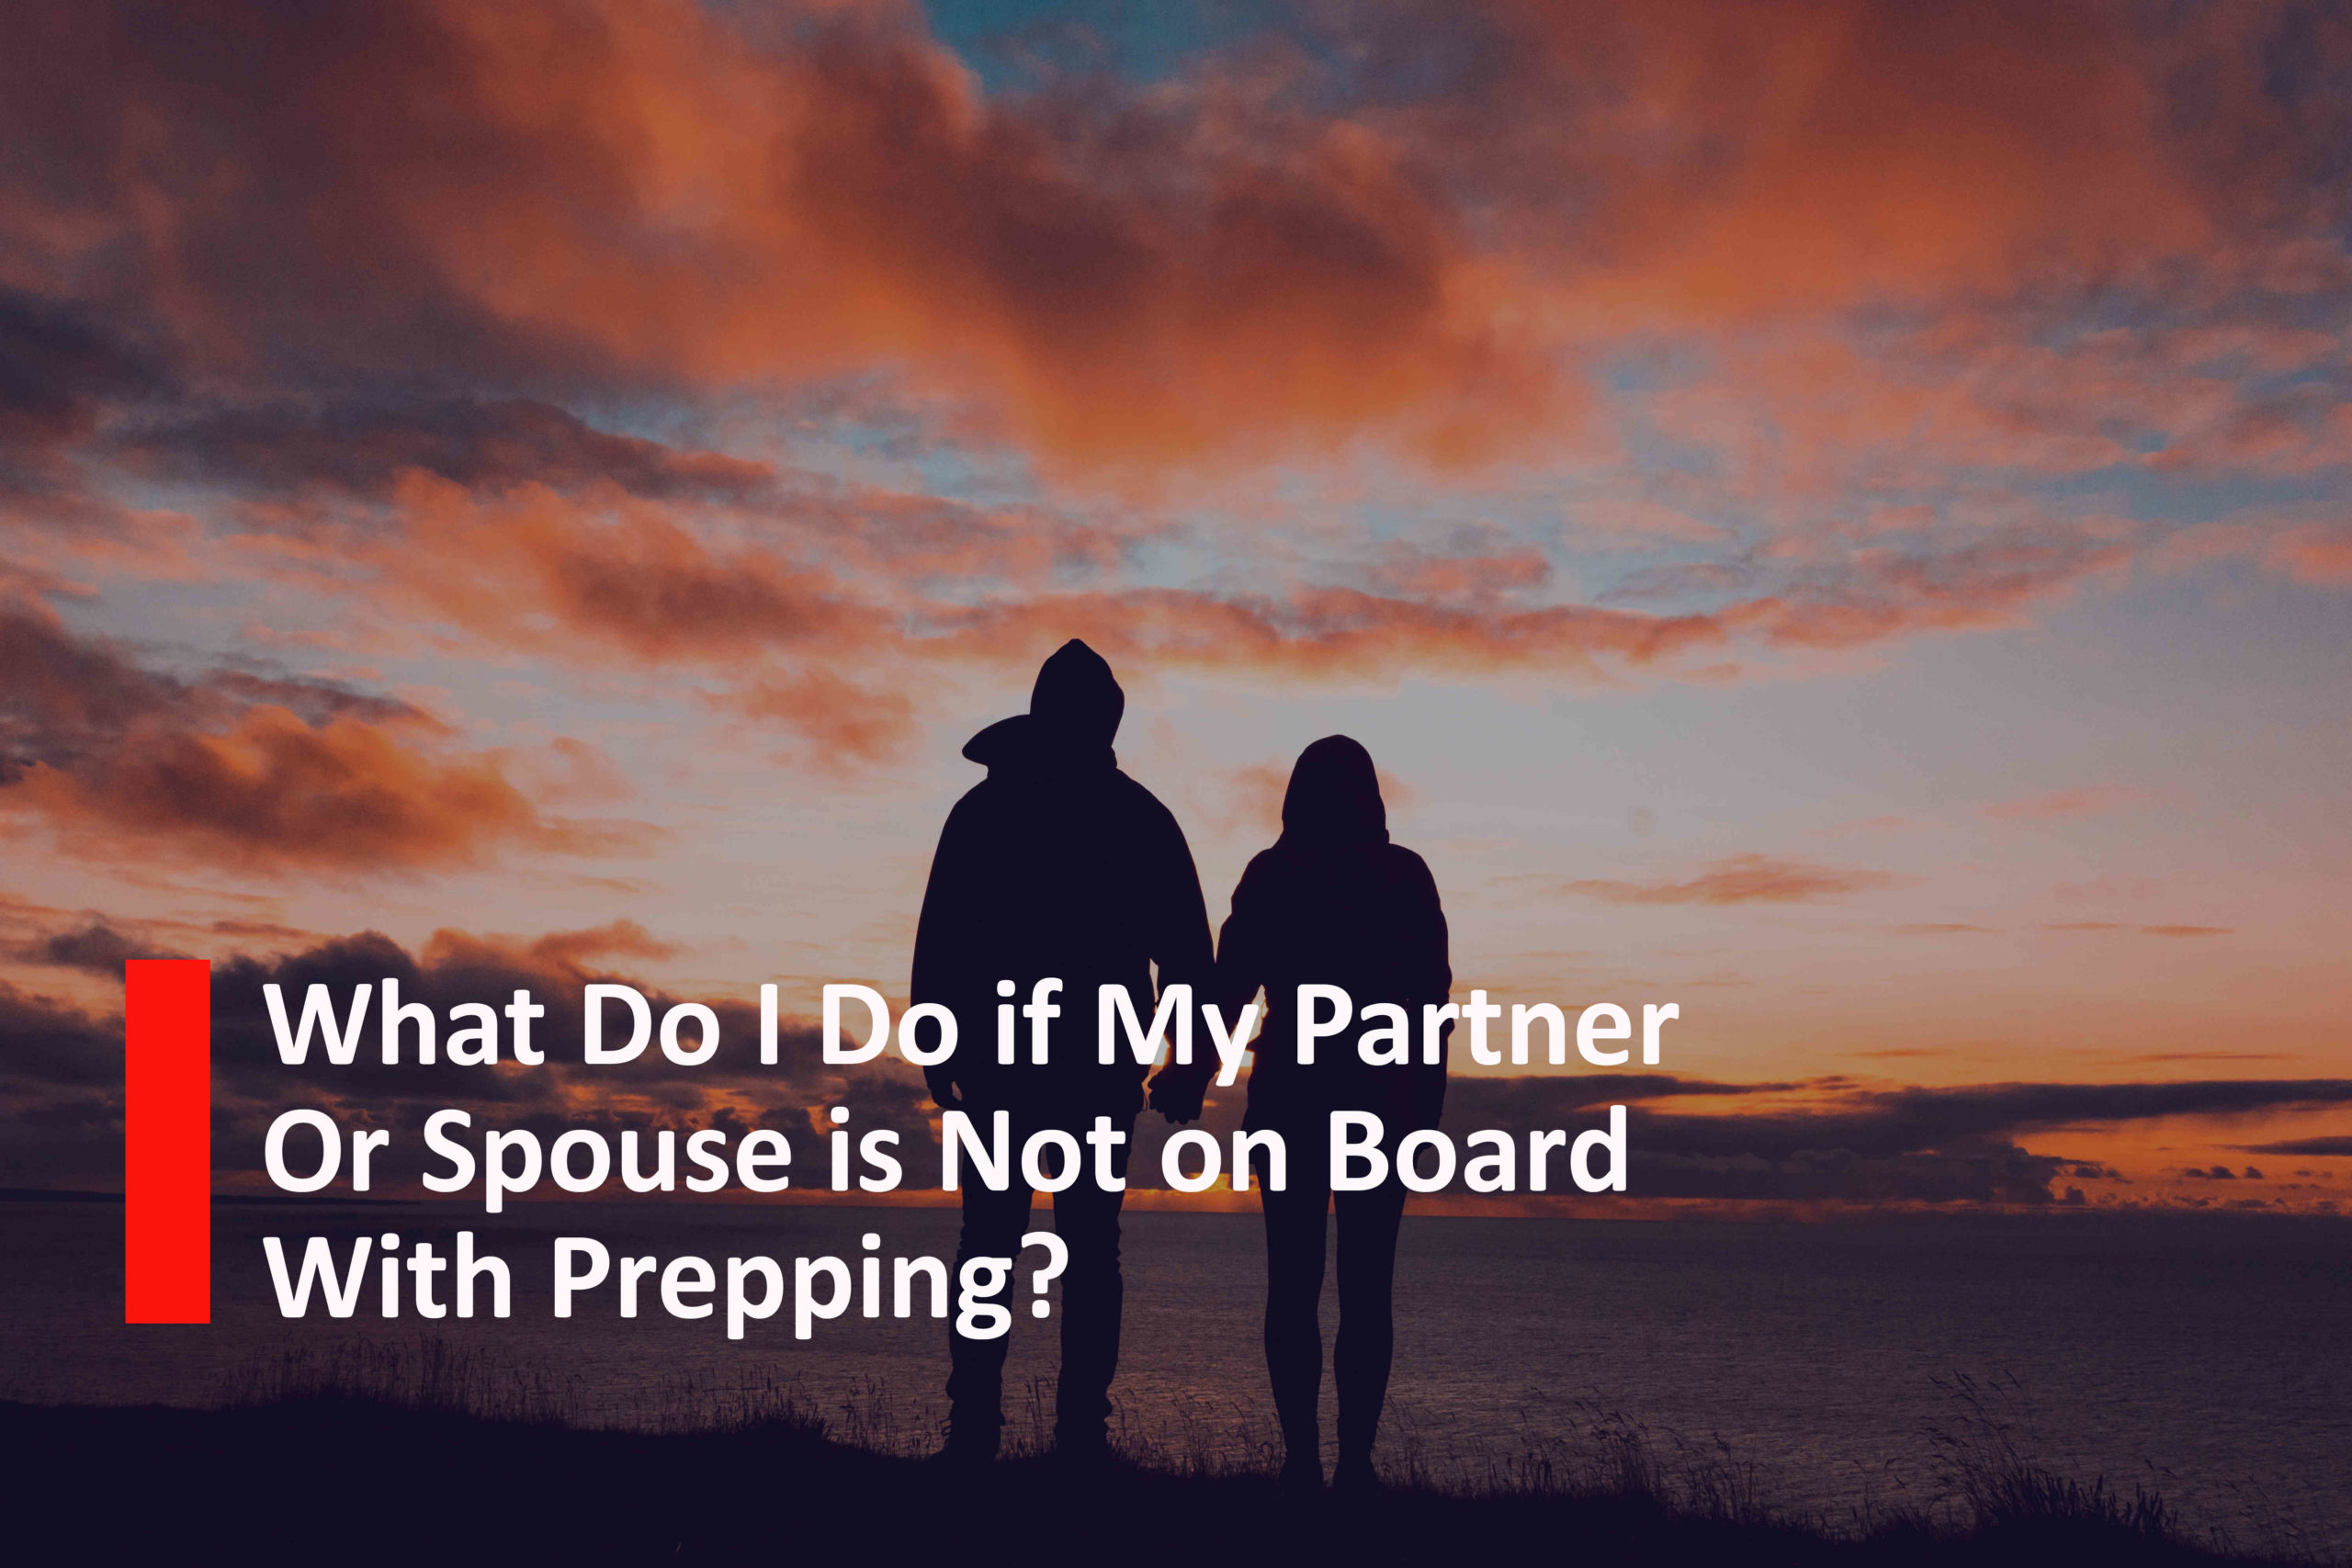 What Do I Do if my Partner or Spouse is Not on Board with Prepping?